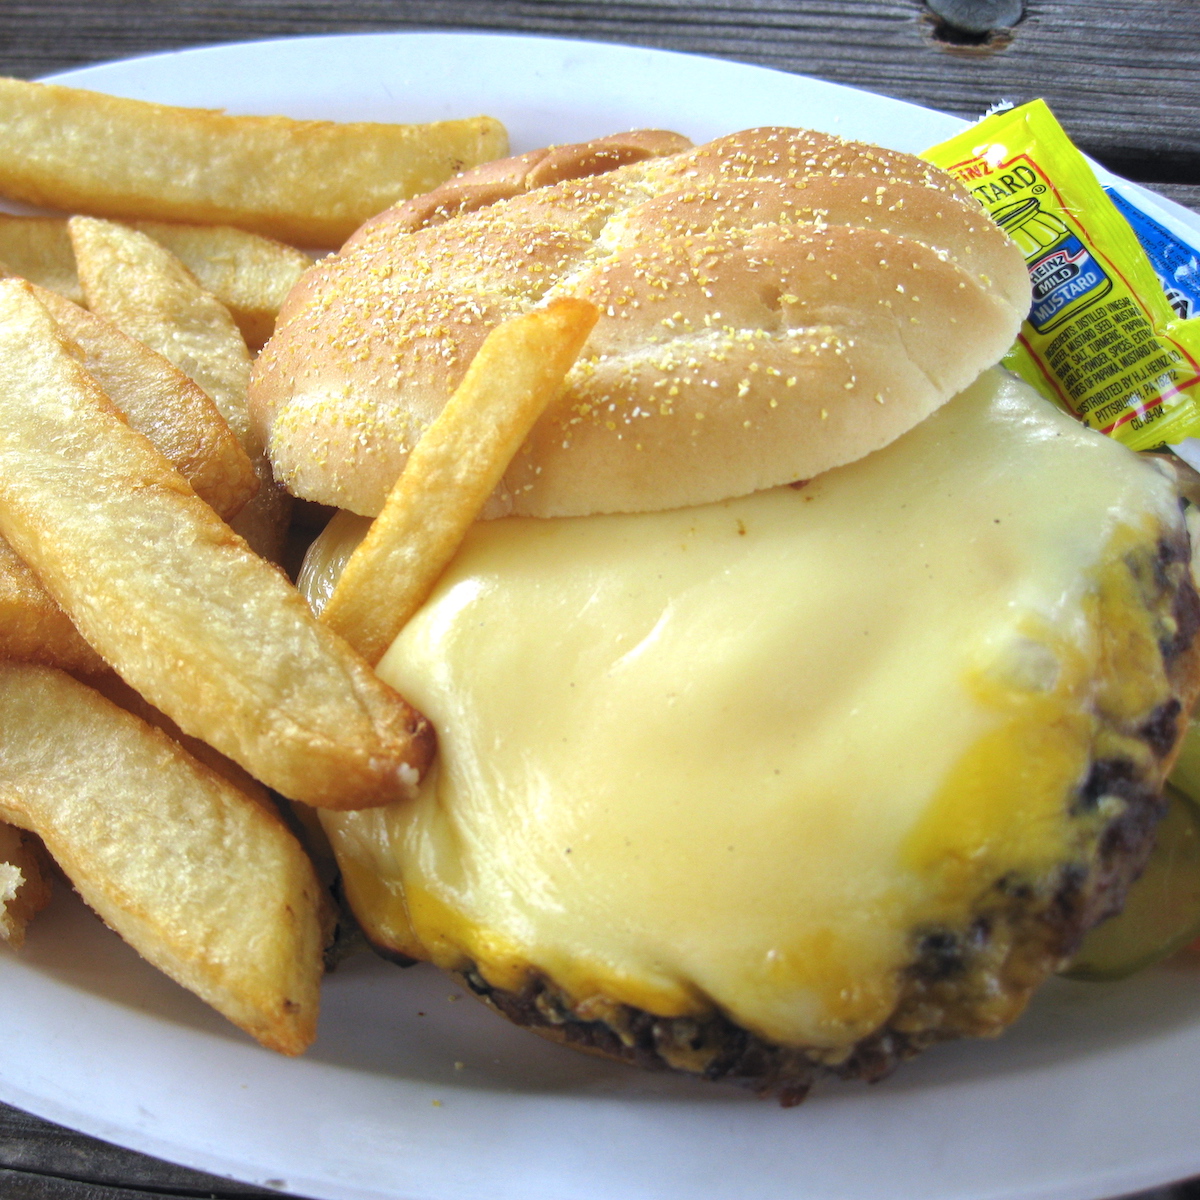 Triple Cheese Burger from Scotty's Landing in Coconut Grove, Florida